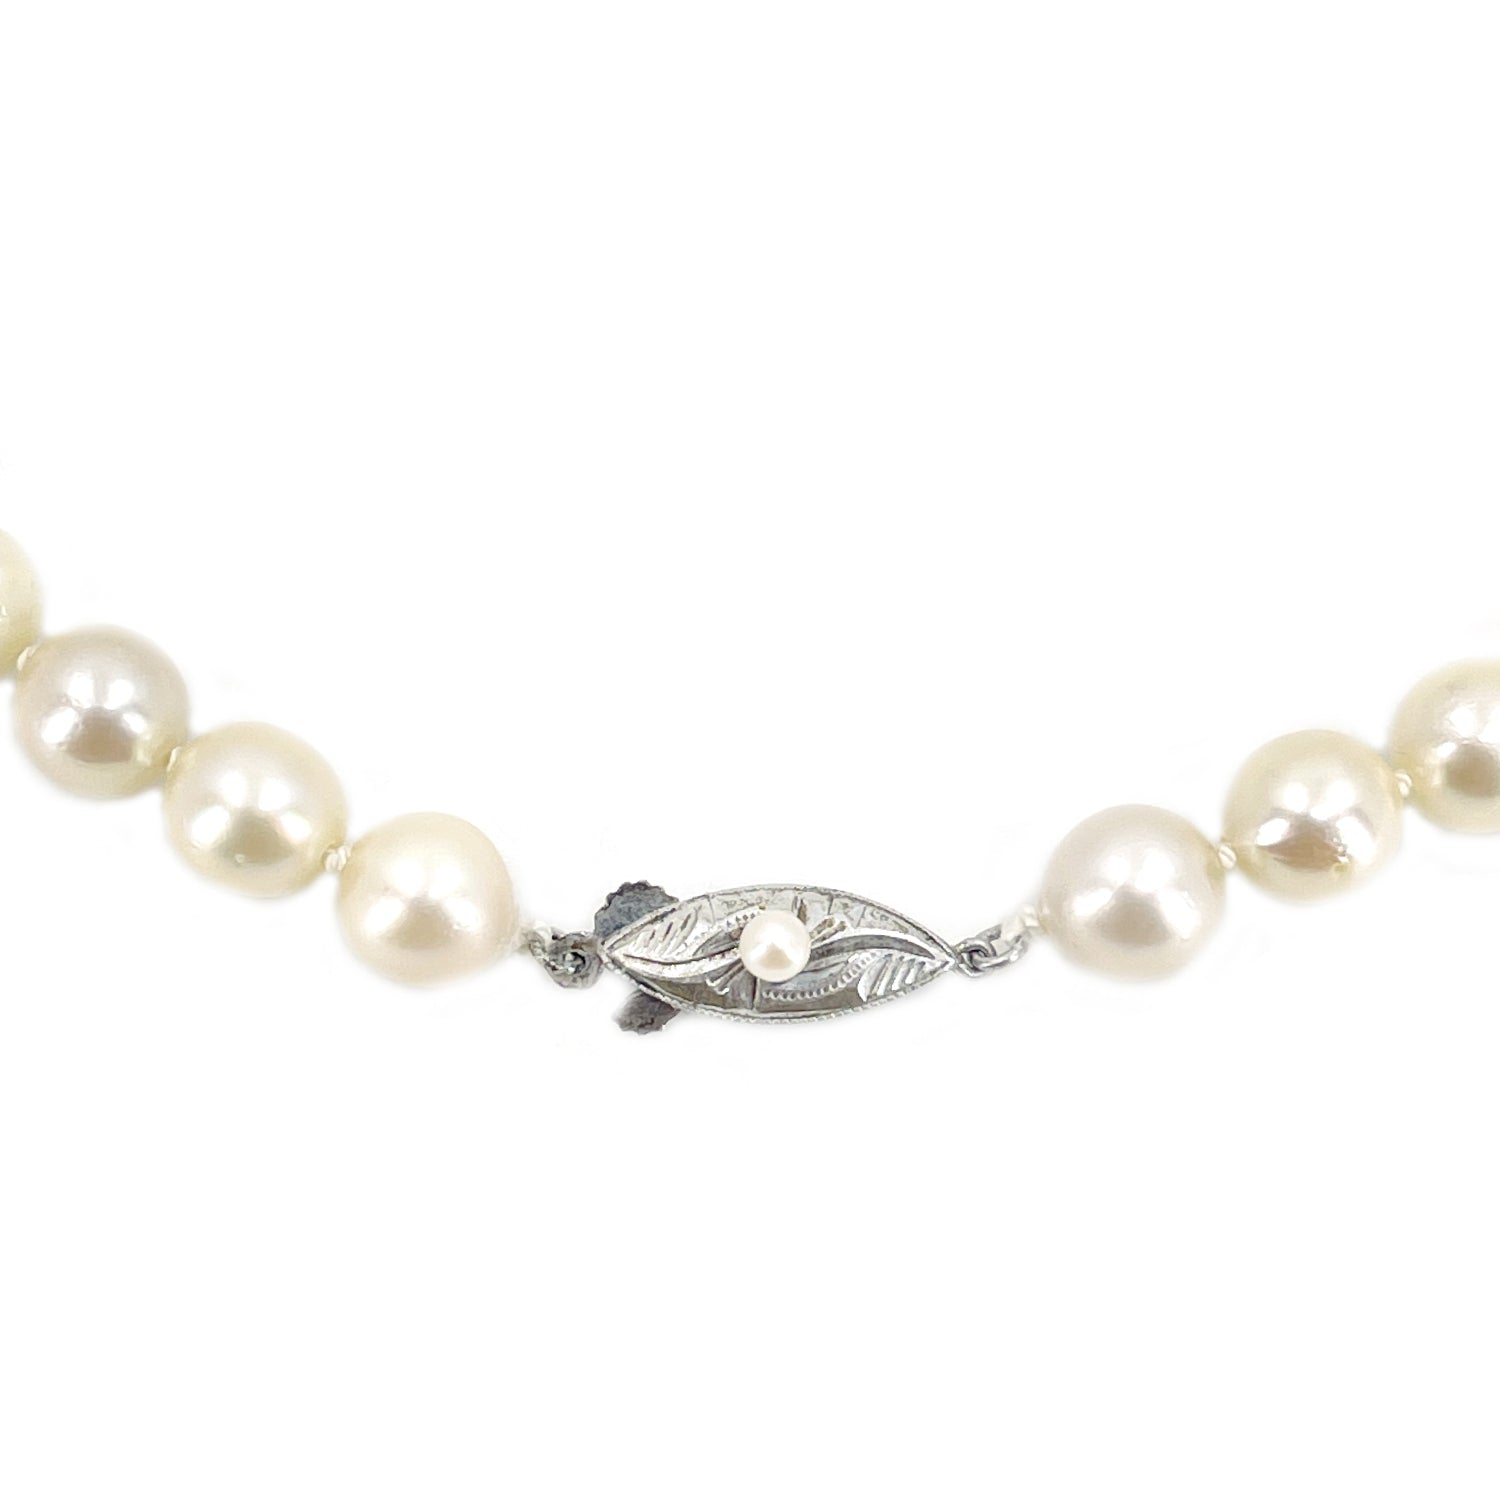 Deco Vintage Japanese Saltwater Cultured Akoya Pearl Necklace - Sterling Silver 17.75 Inch